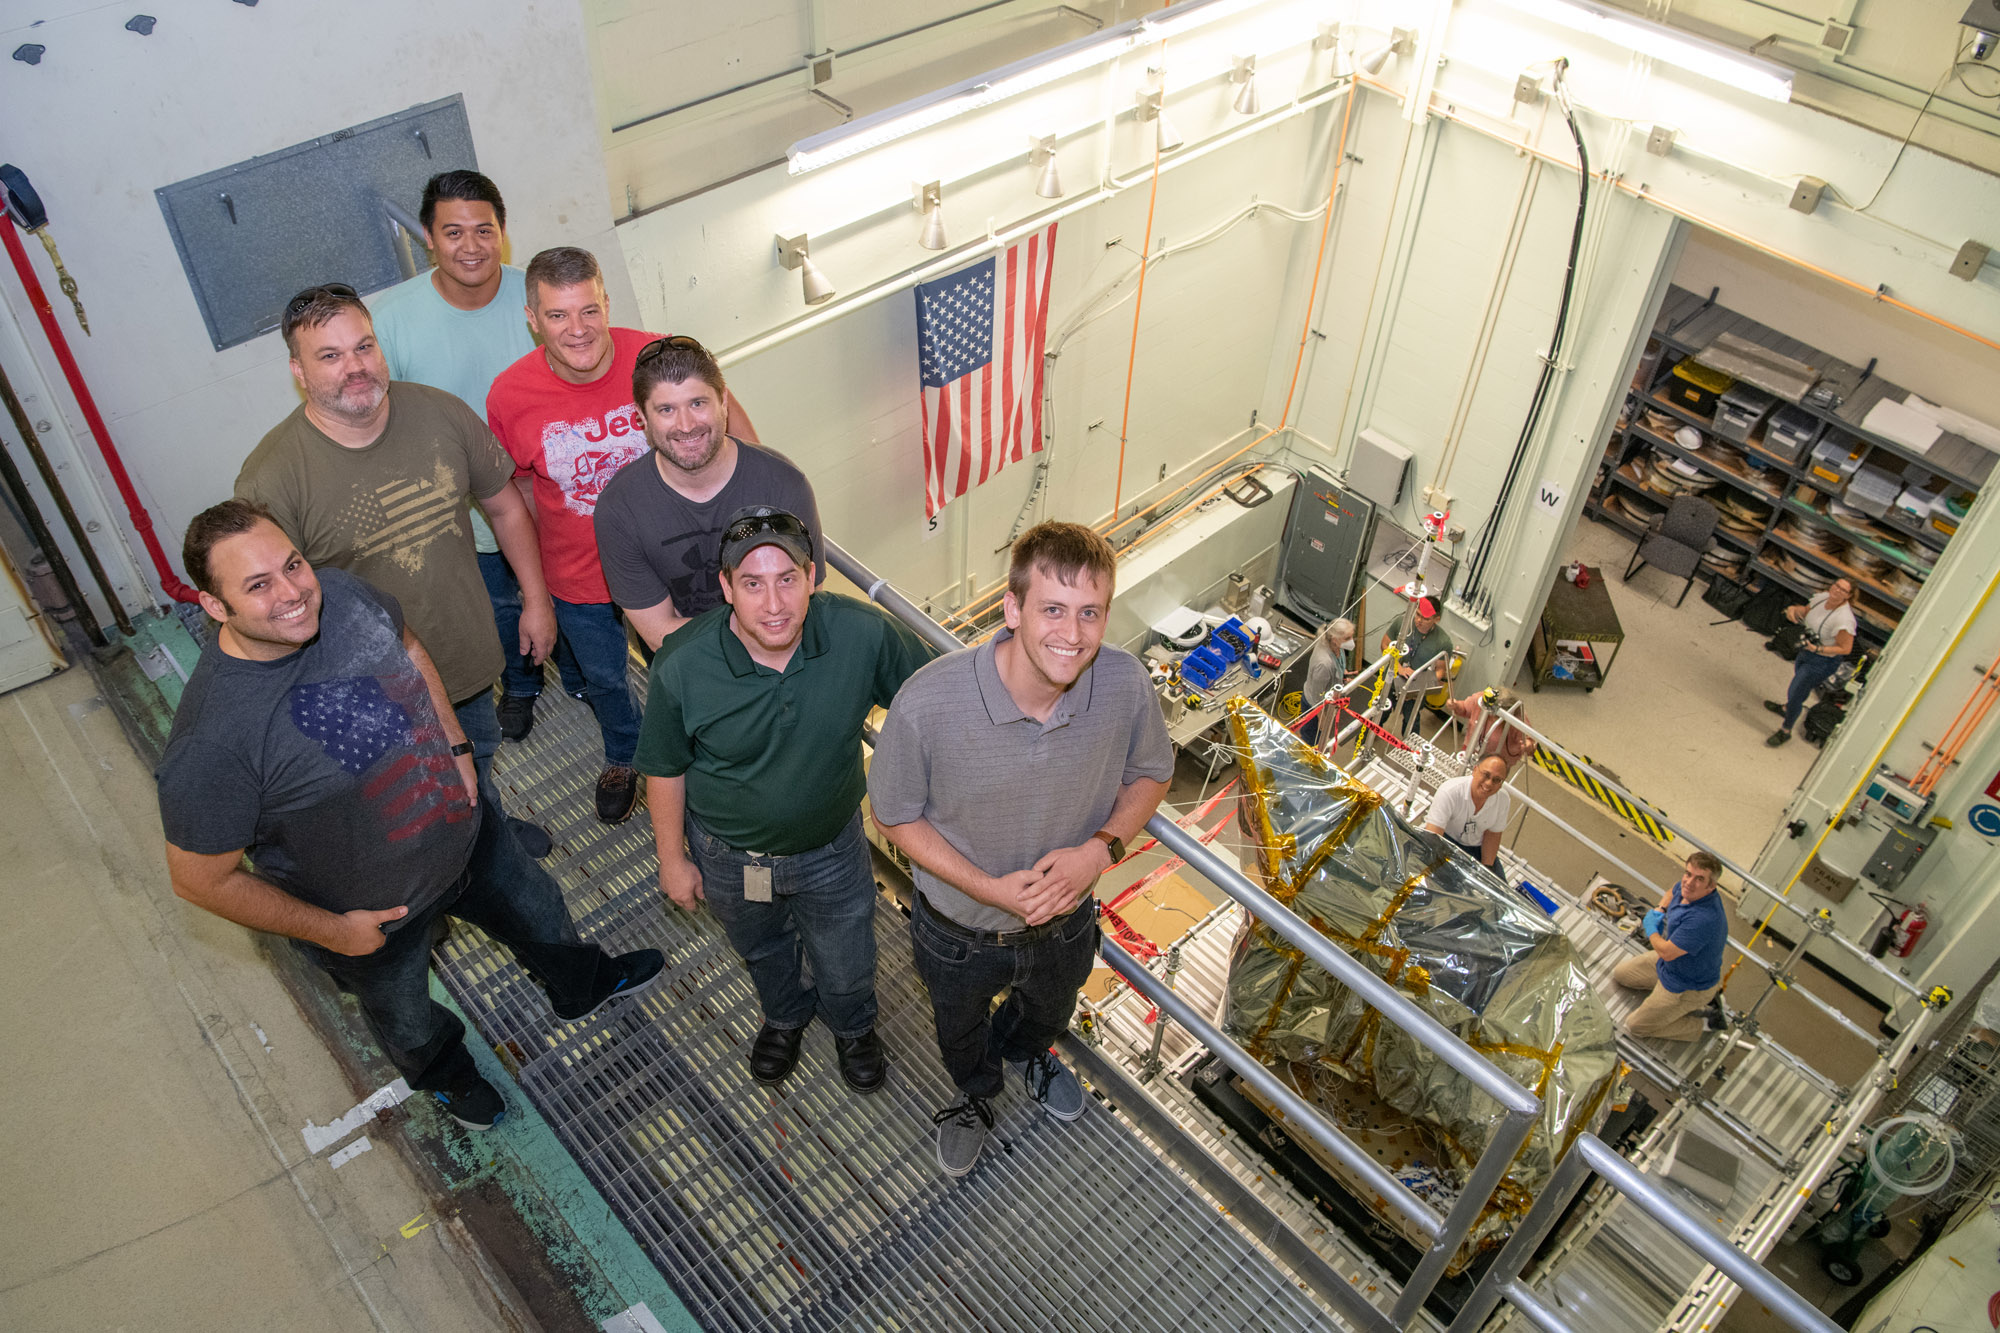 The Ocean Color Instrument mechanical team stands on the balcony overlooking the bagged instrument after successfully installing it onto the X axis (vertical) vibration shaker table.